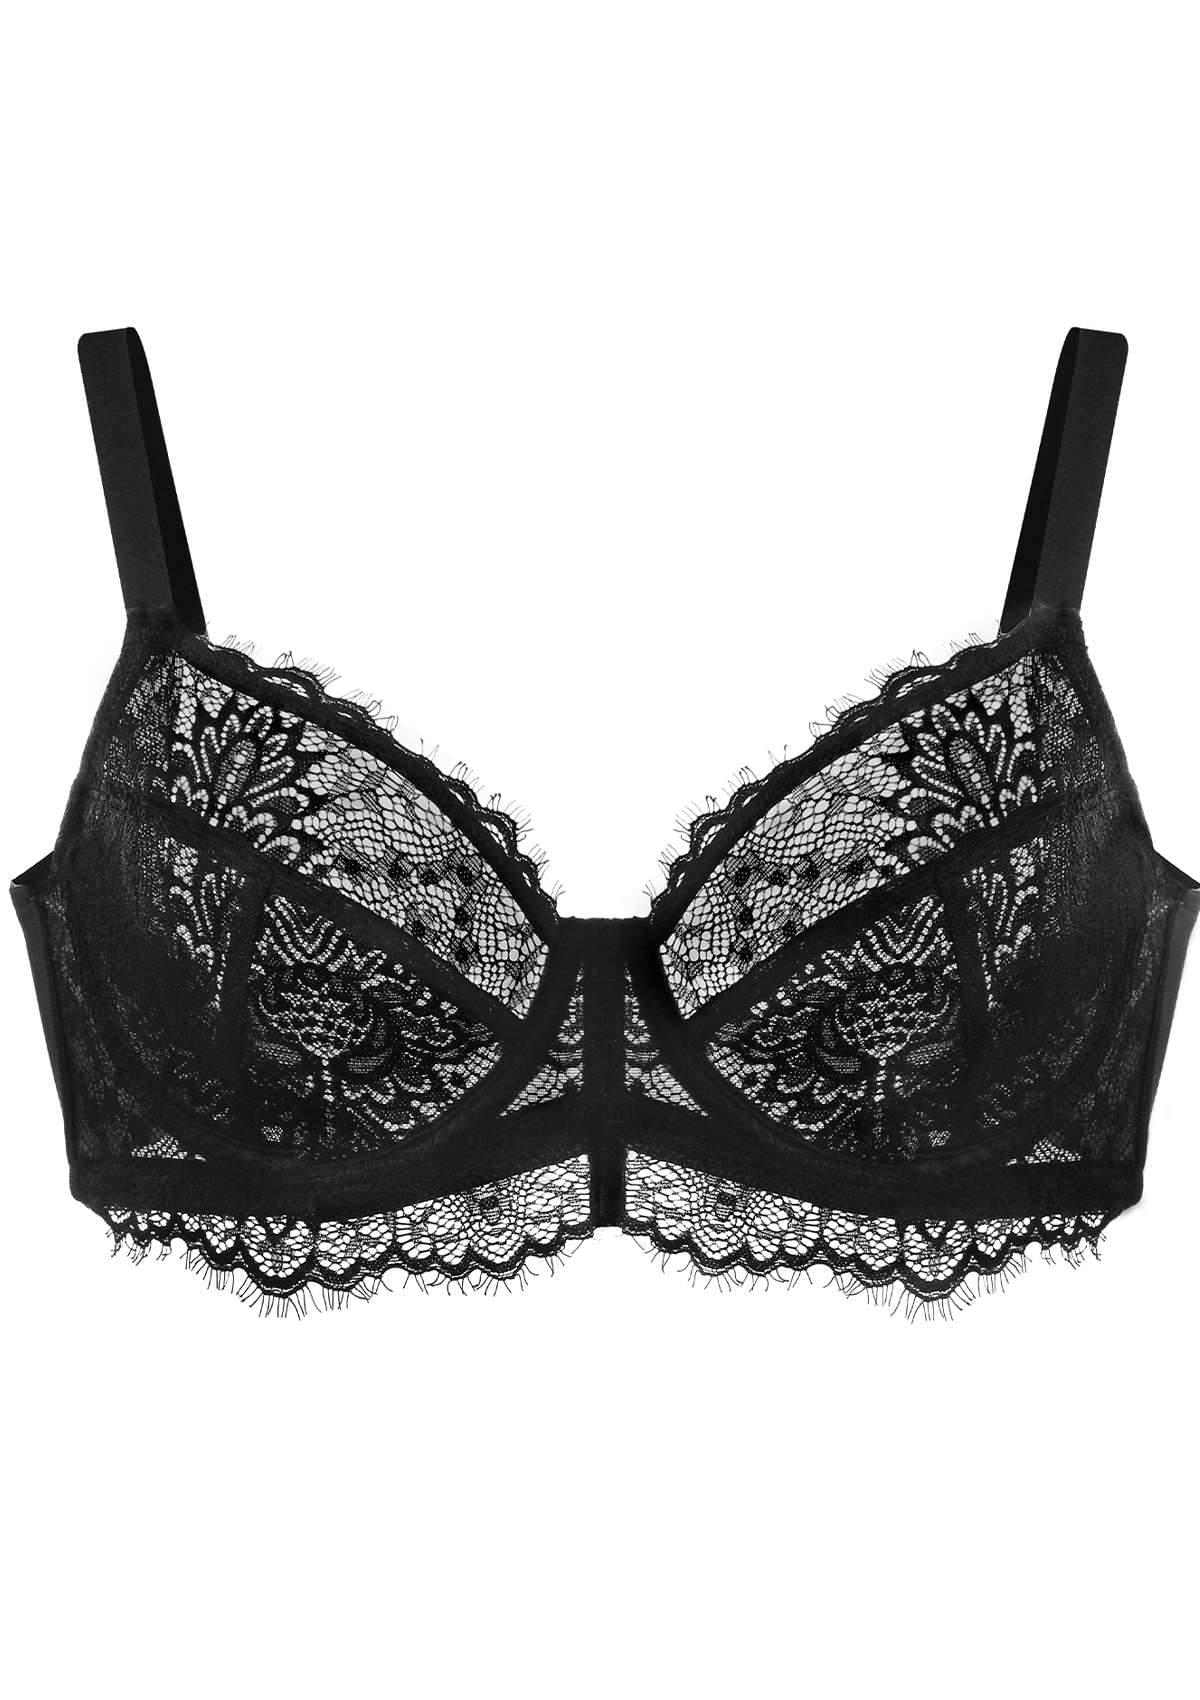 HSIA Sunflower Underwire Lace Bra: Unlined Full Coverage Support Bra - Black / 48 / D